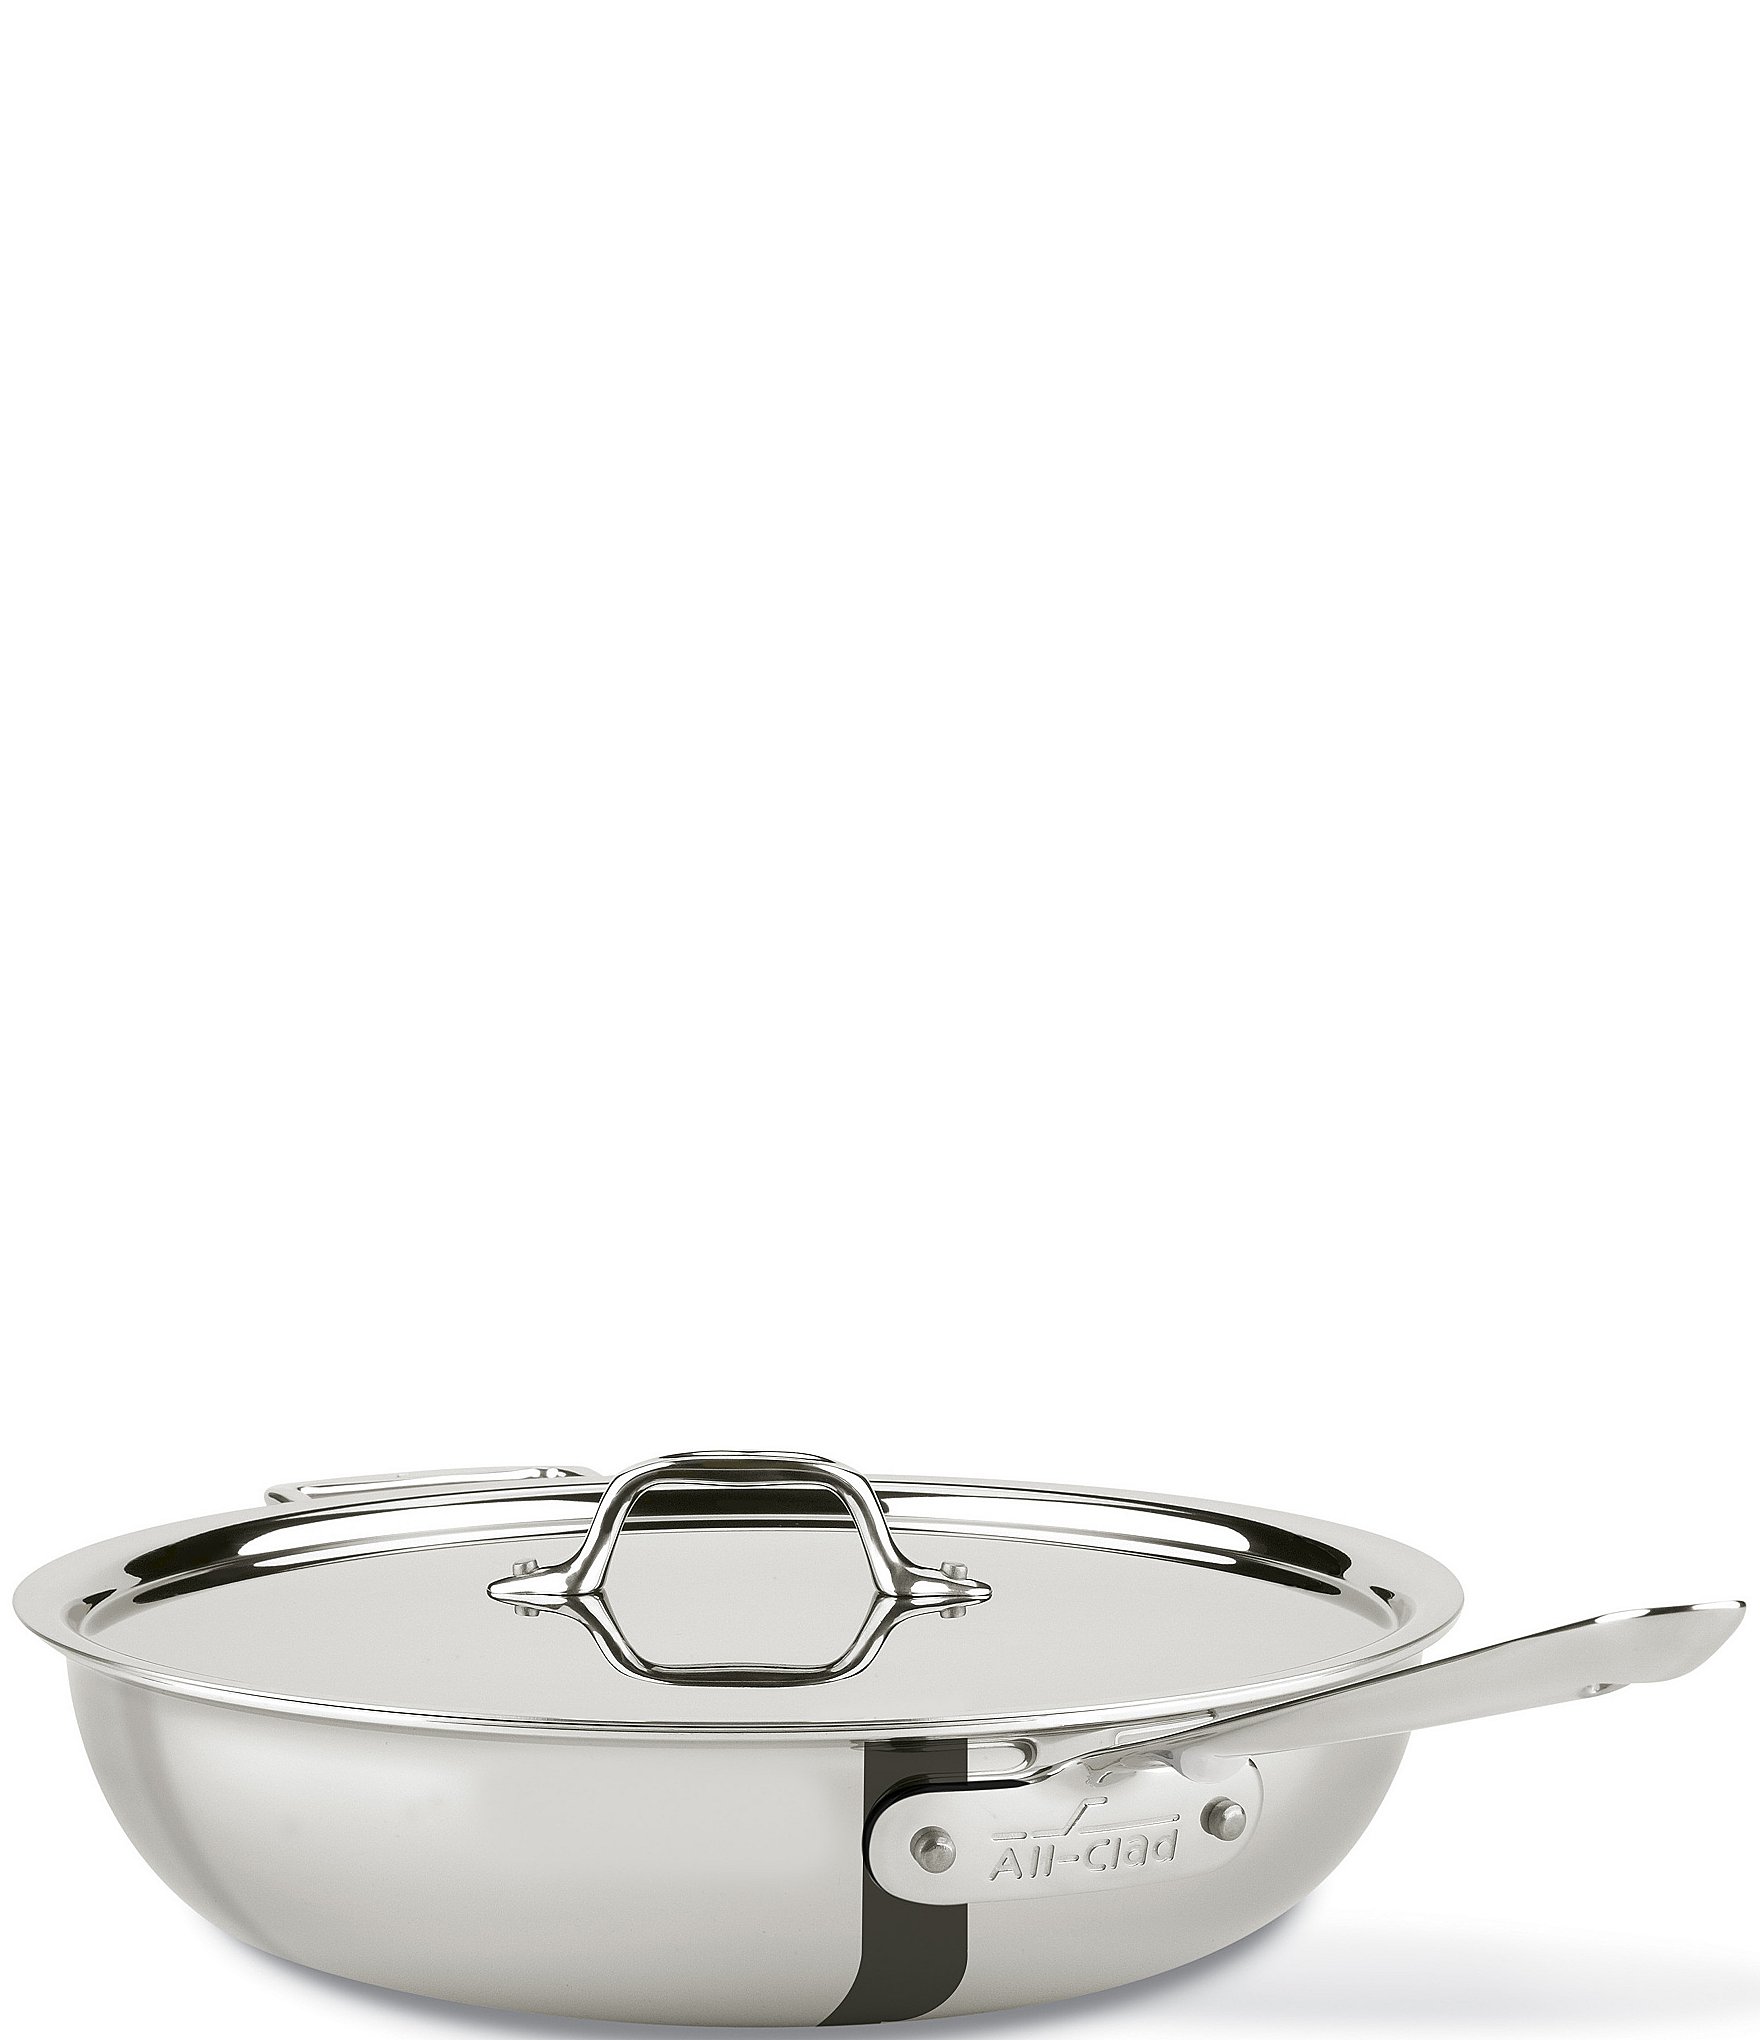 All-Clad D3 Stainless Steel 3-Ply Bonded 7-Quart Sunday Supper Pan